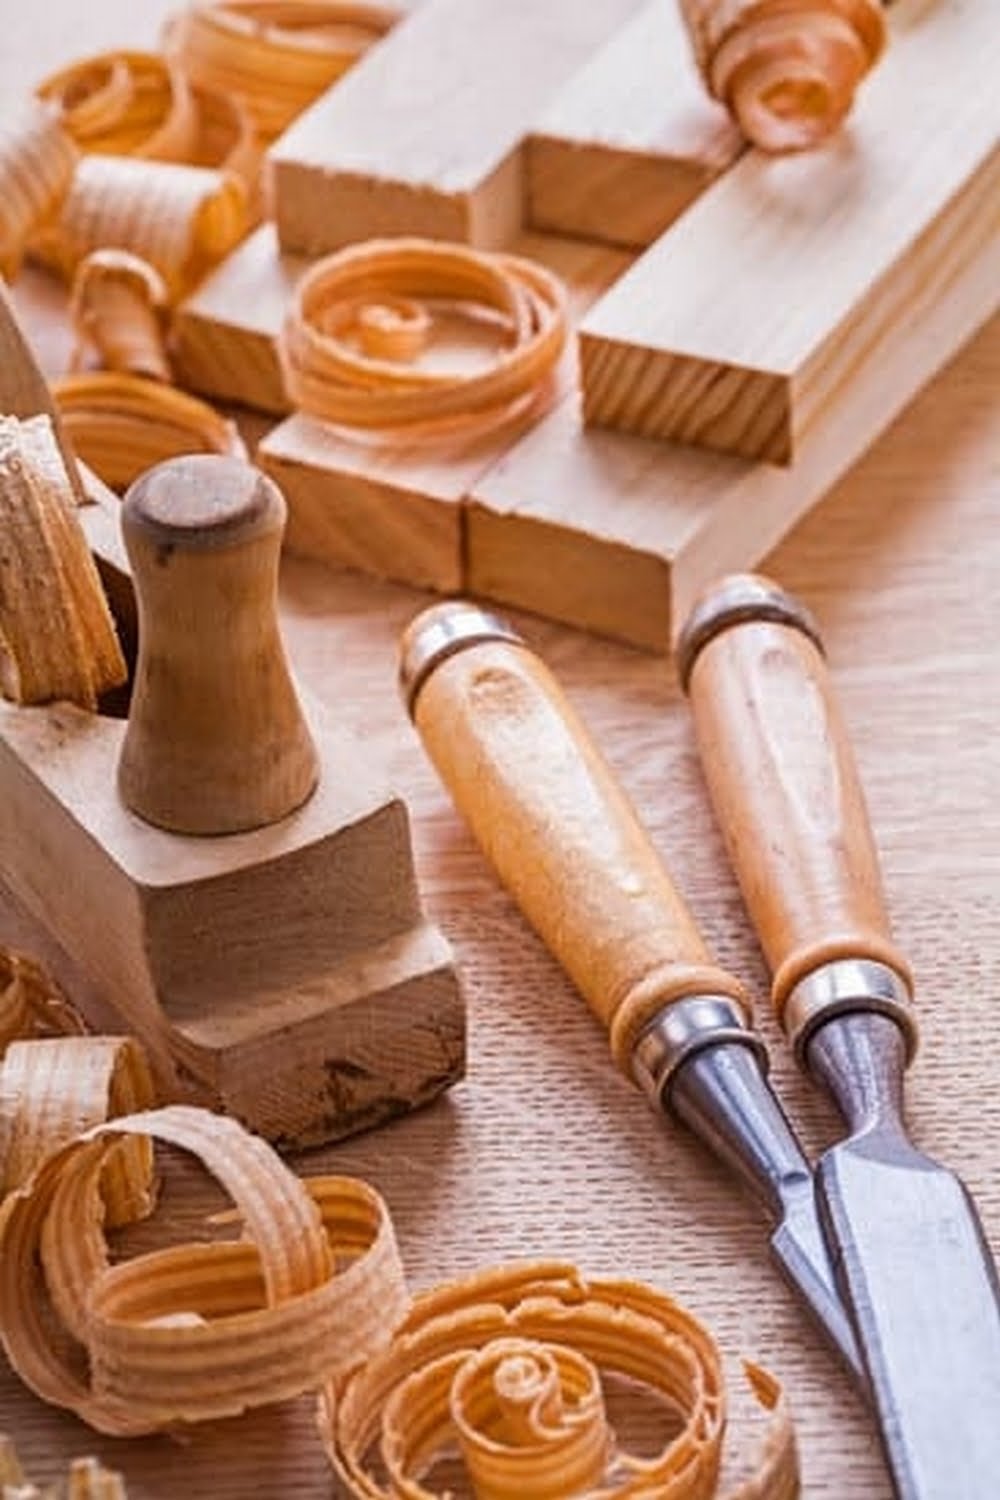 The Different Types Of Woodworking Ideas DIY Crafts To Choose From